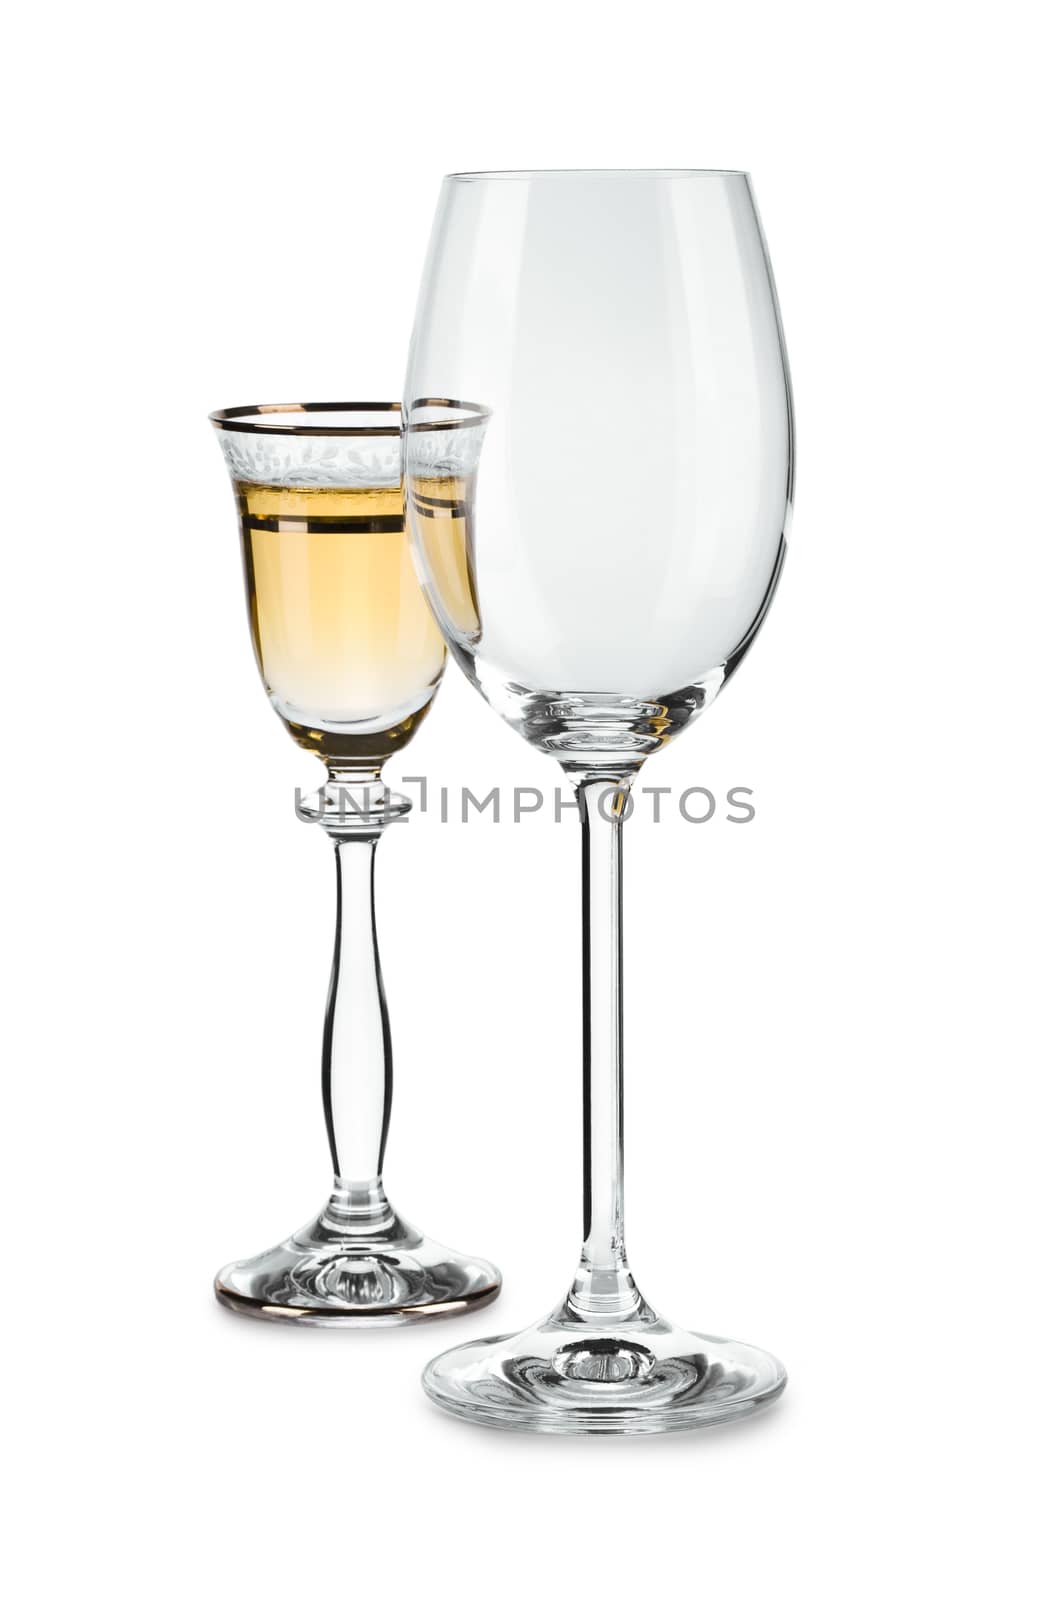 full and epmty wineglases by mihalec